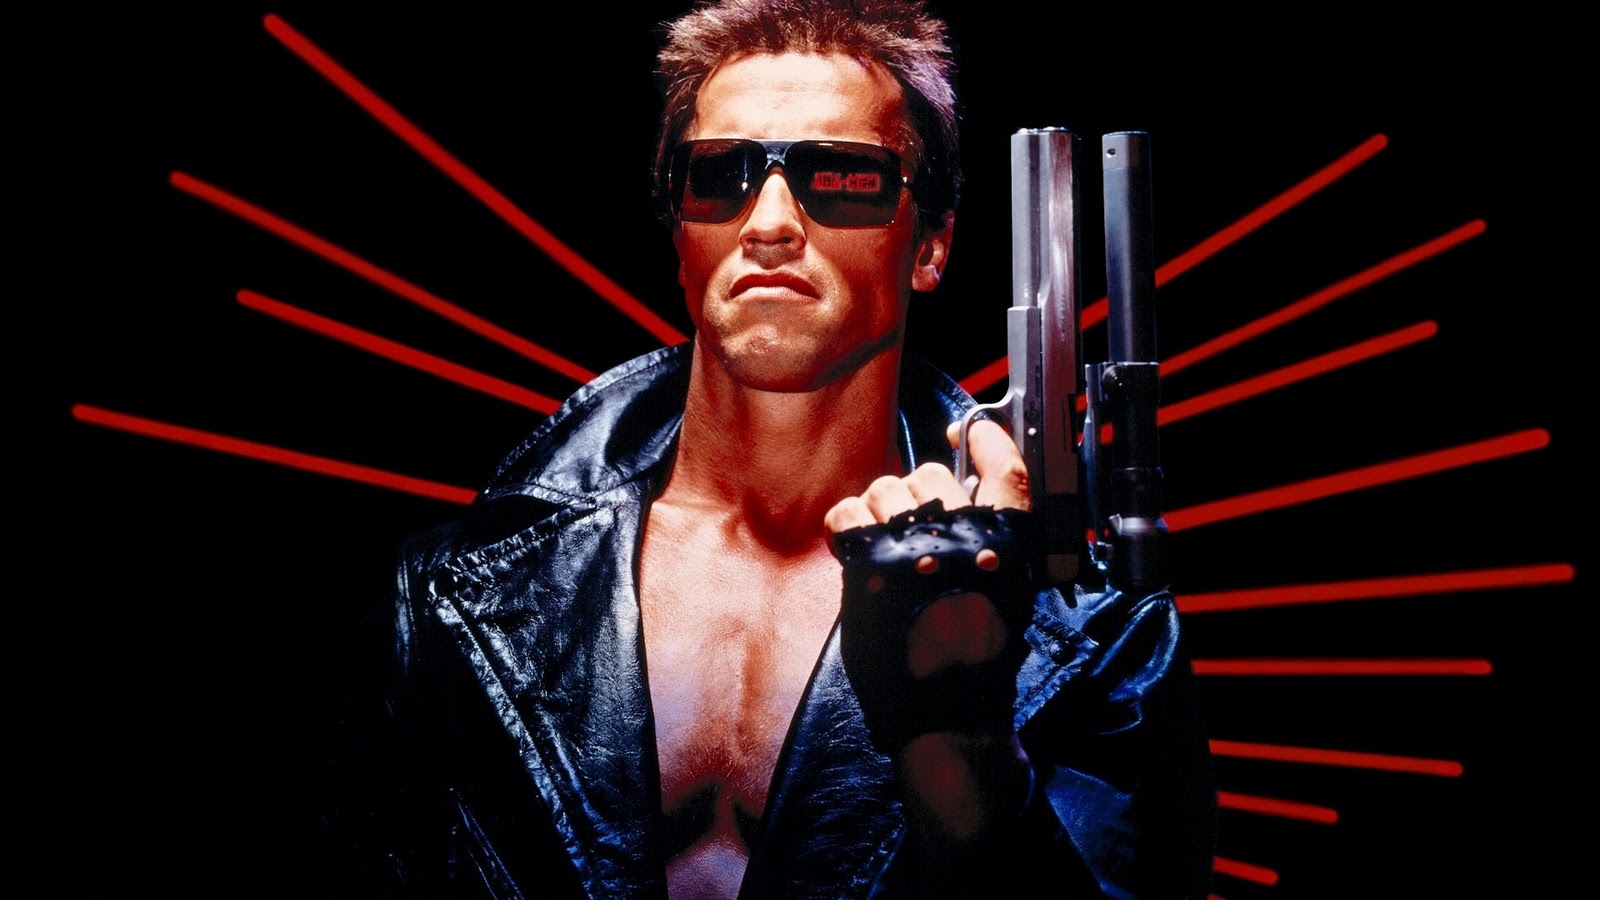 An image of Arnold Schwarzenegger in his iconic role as The Terminator.